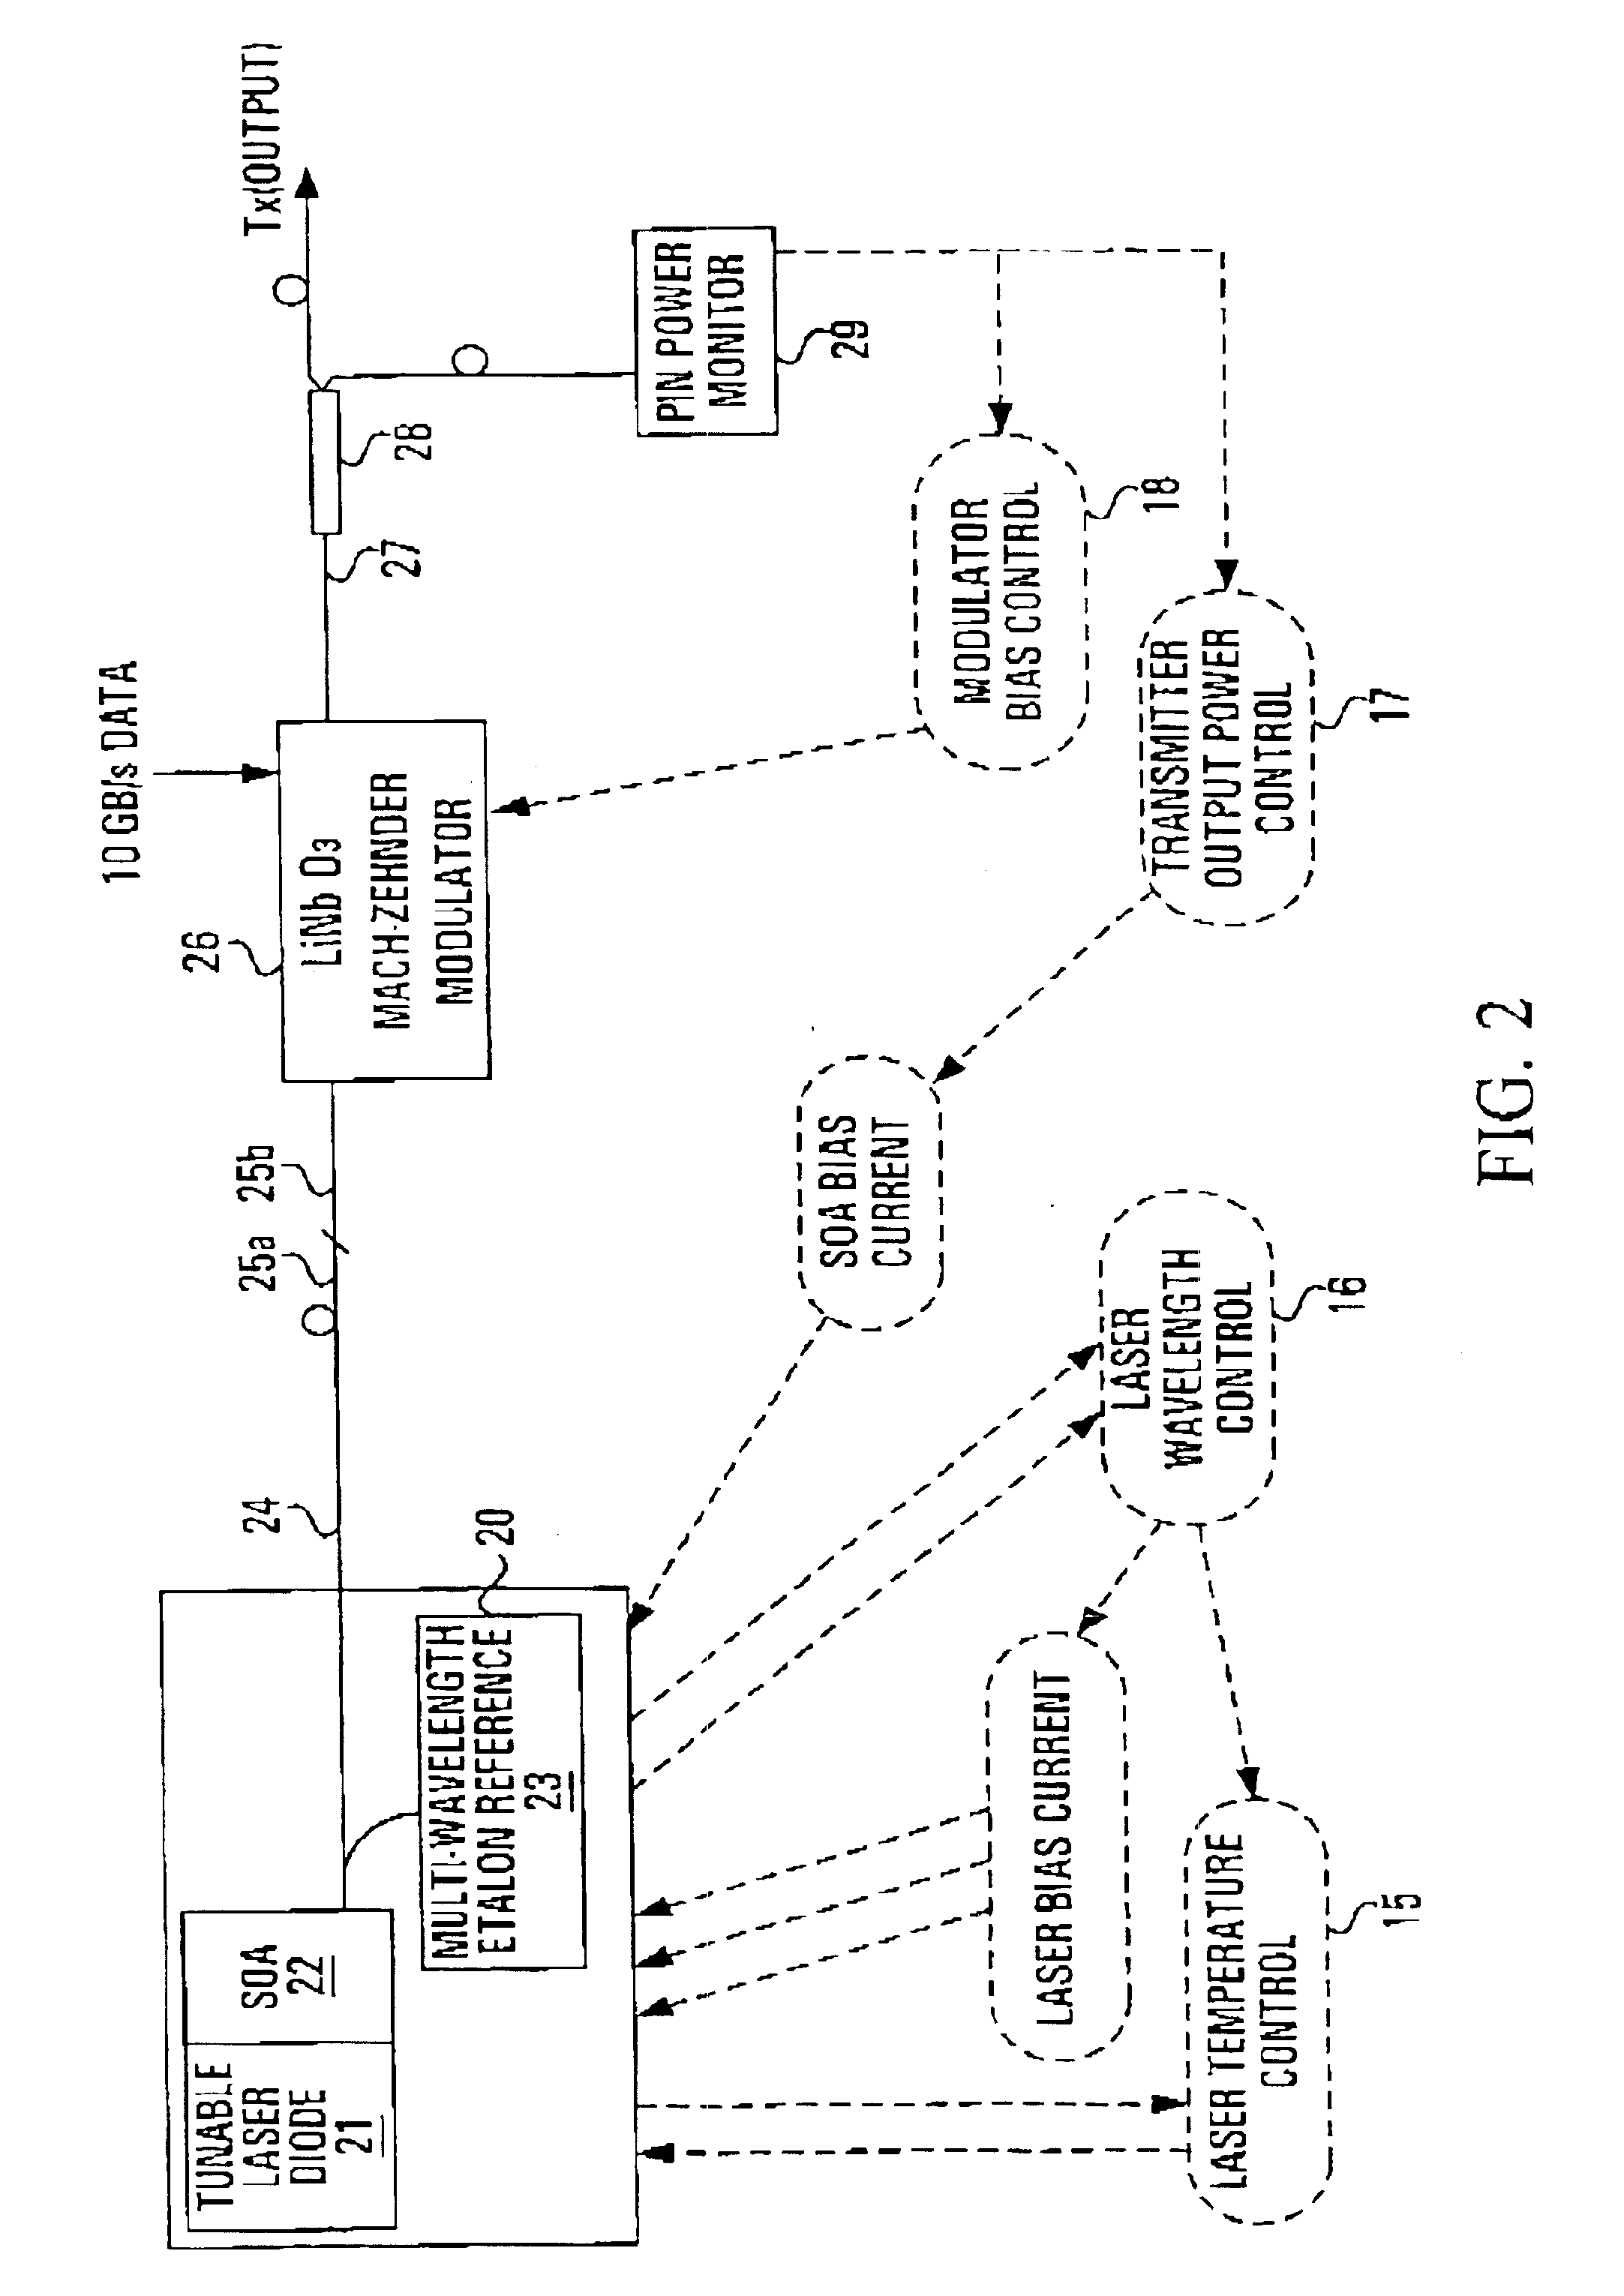 Use of amplified spontaneous emission from a semiconductor optical amplifier to minimize channel interference during initialization of an externally modulated DWDM transmitter